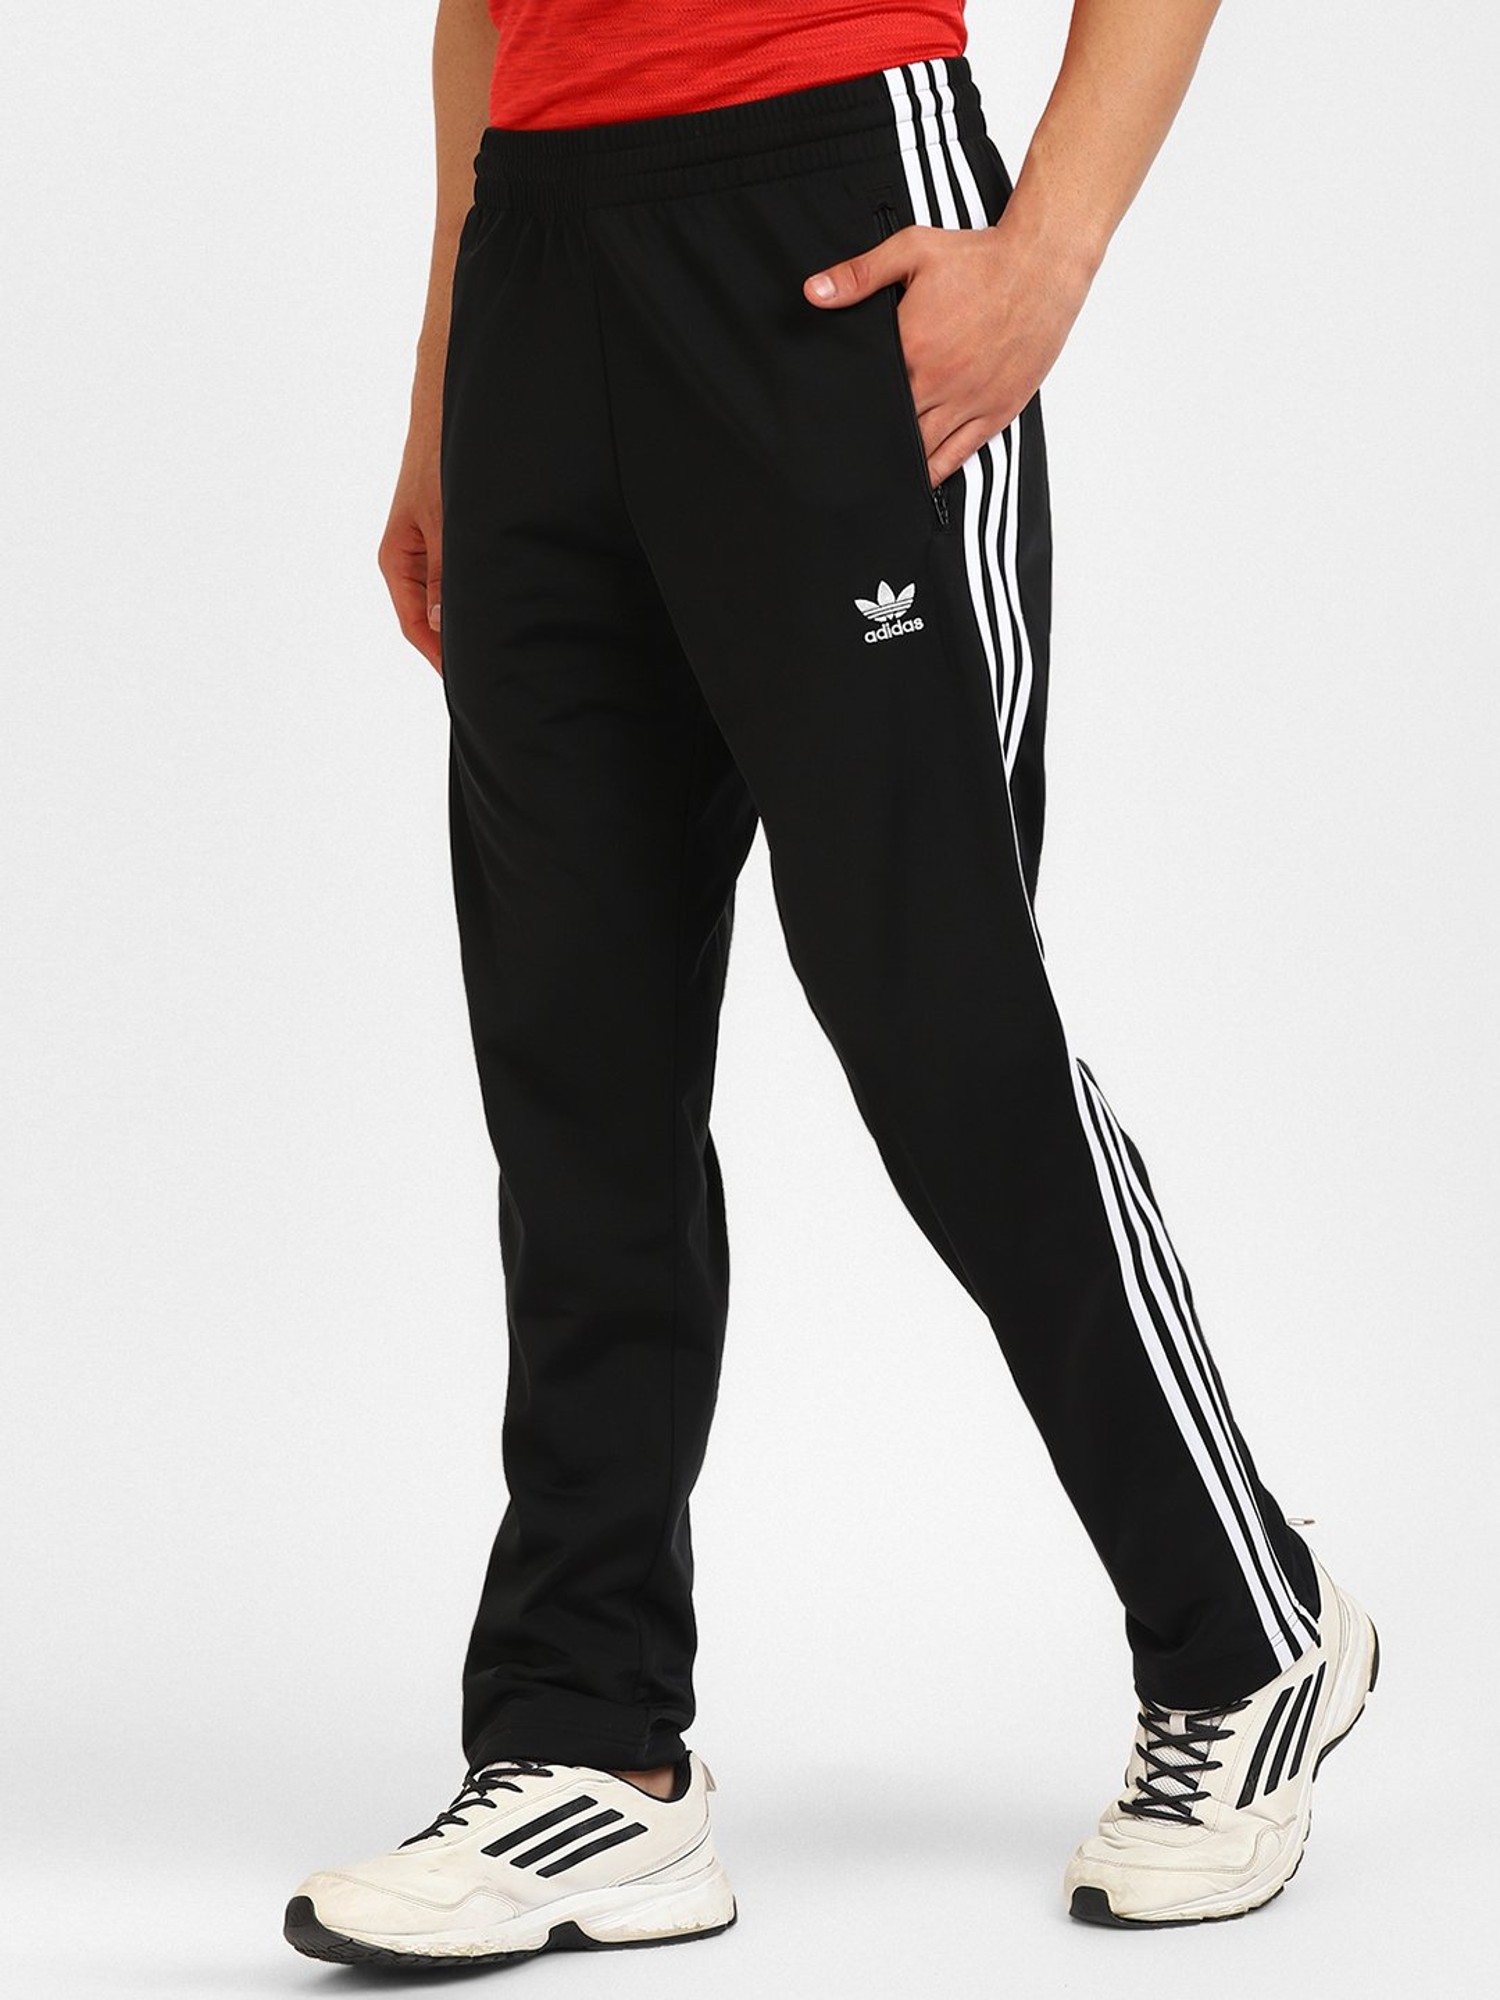 Adidas Mens Originals Flamestrike Track Pants - Get Best Price from  Manufacturers & Suppliers in India